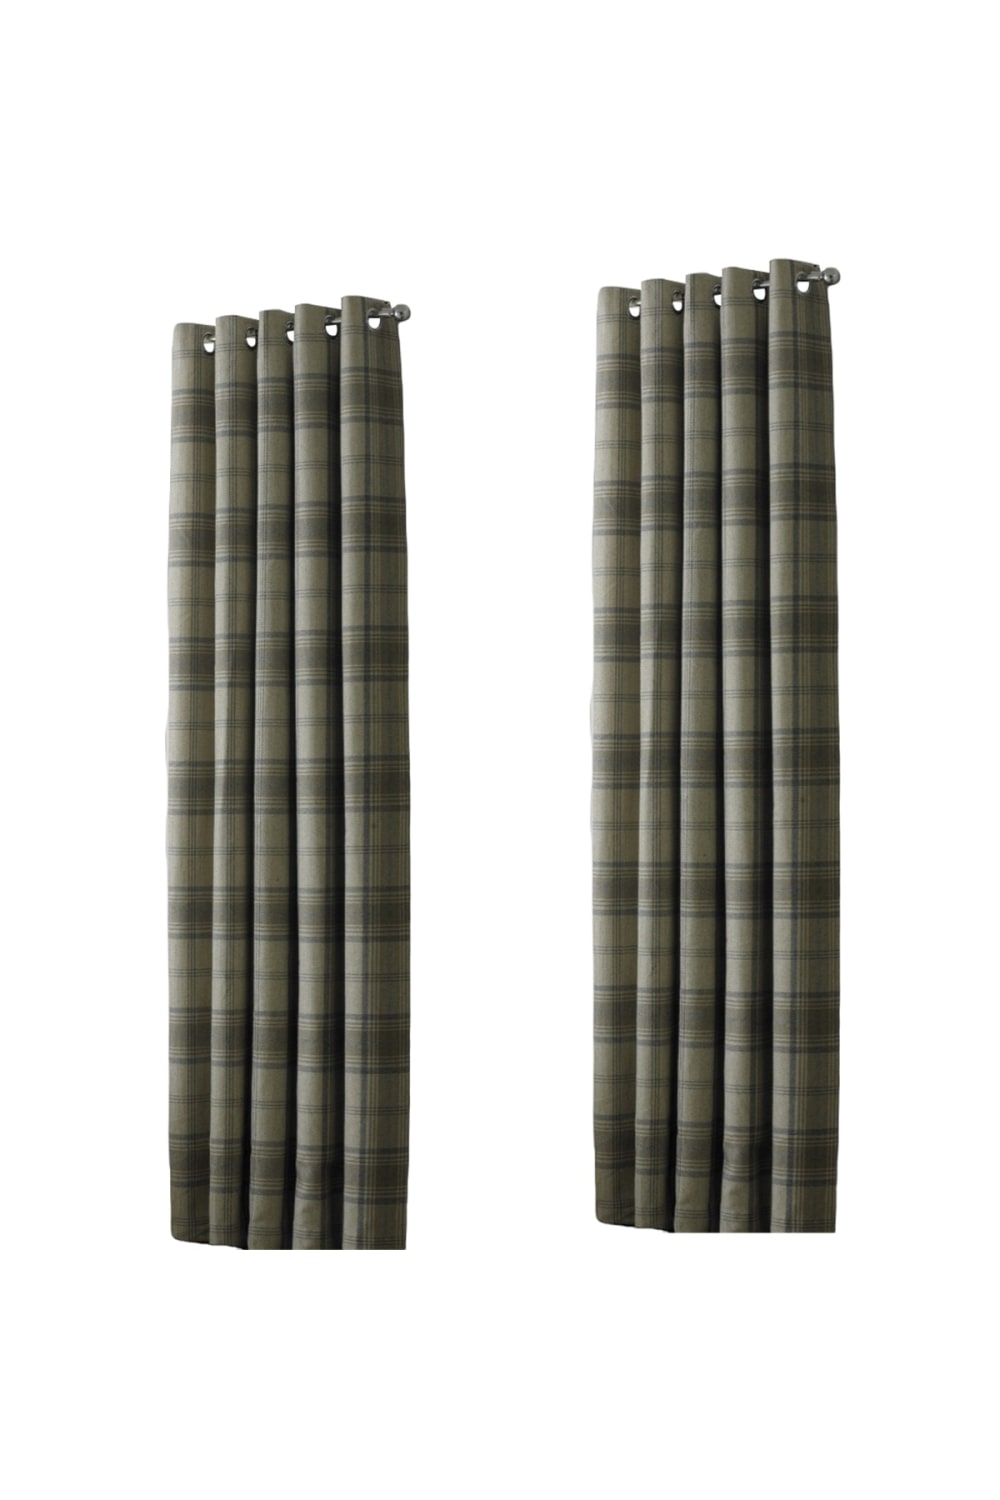 Riva Home Aviemore Checked Pattern Ringtop Curtains/Drapes (Natural) (66 x 54in (168 x 137cm))